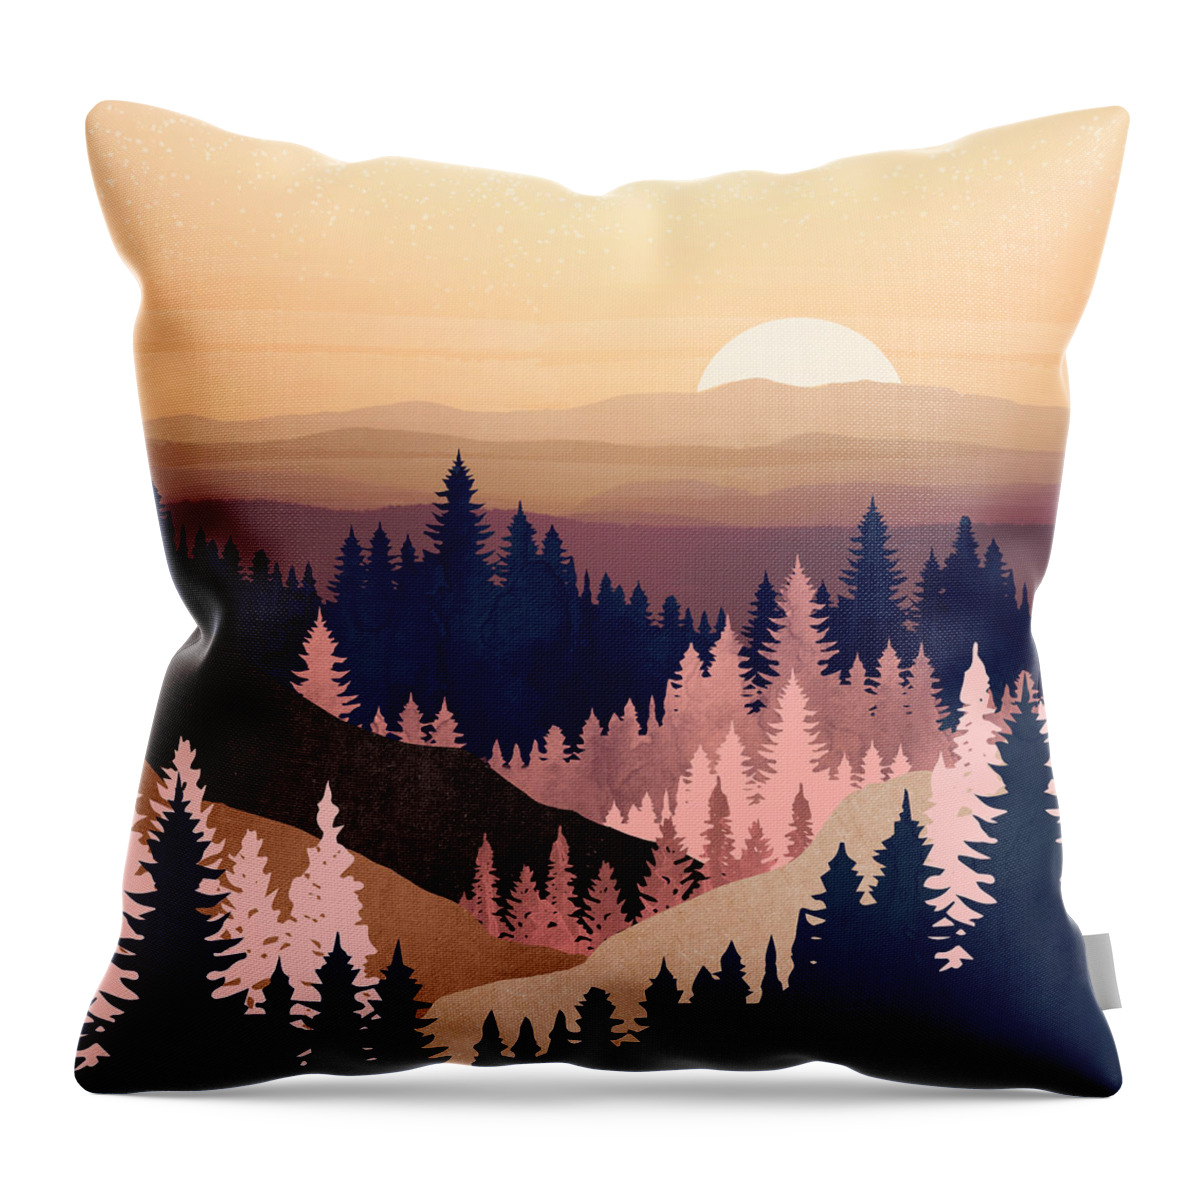 Summer Throw Pillow featuring the digital art Summer Dusk by Spacefrog Designs